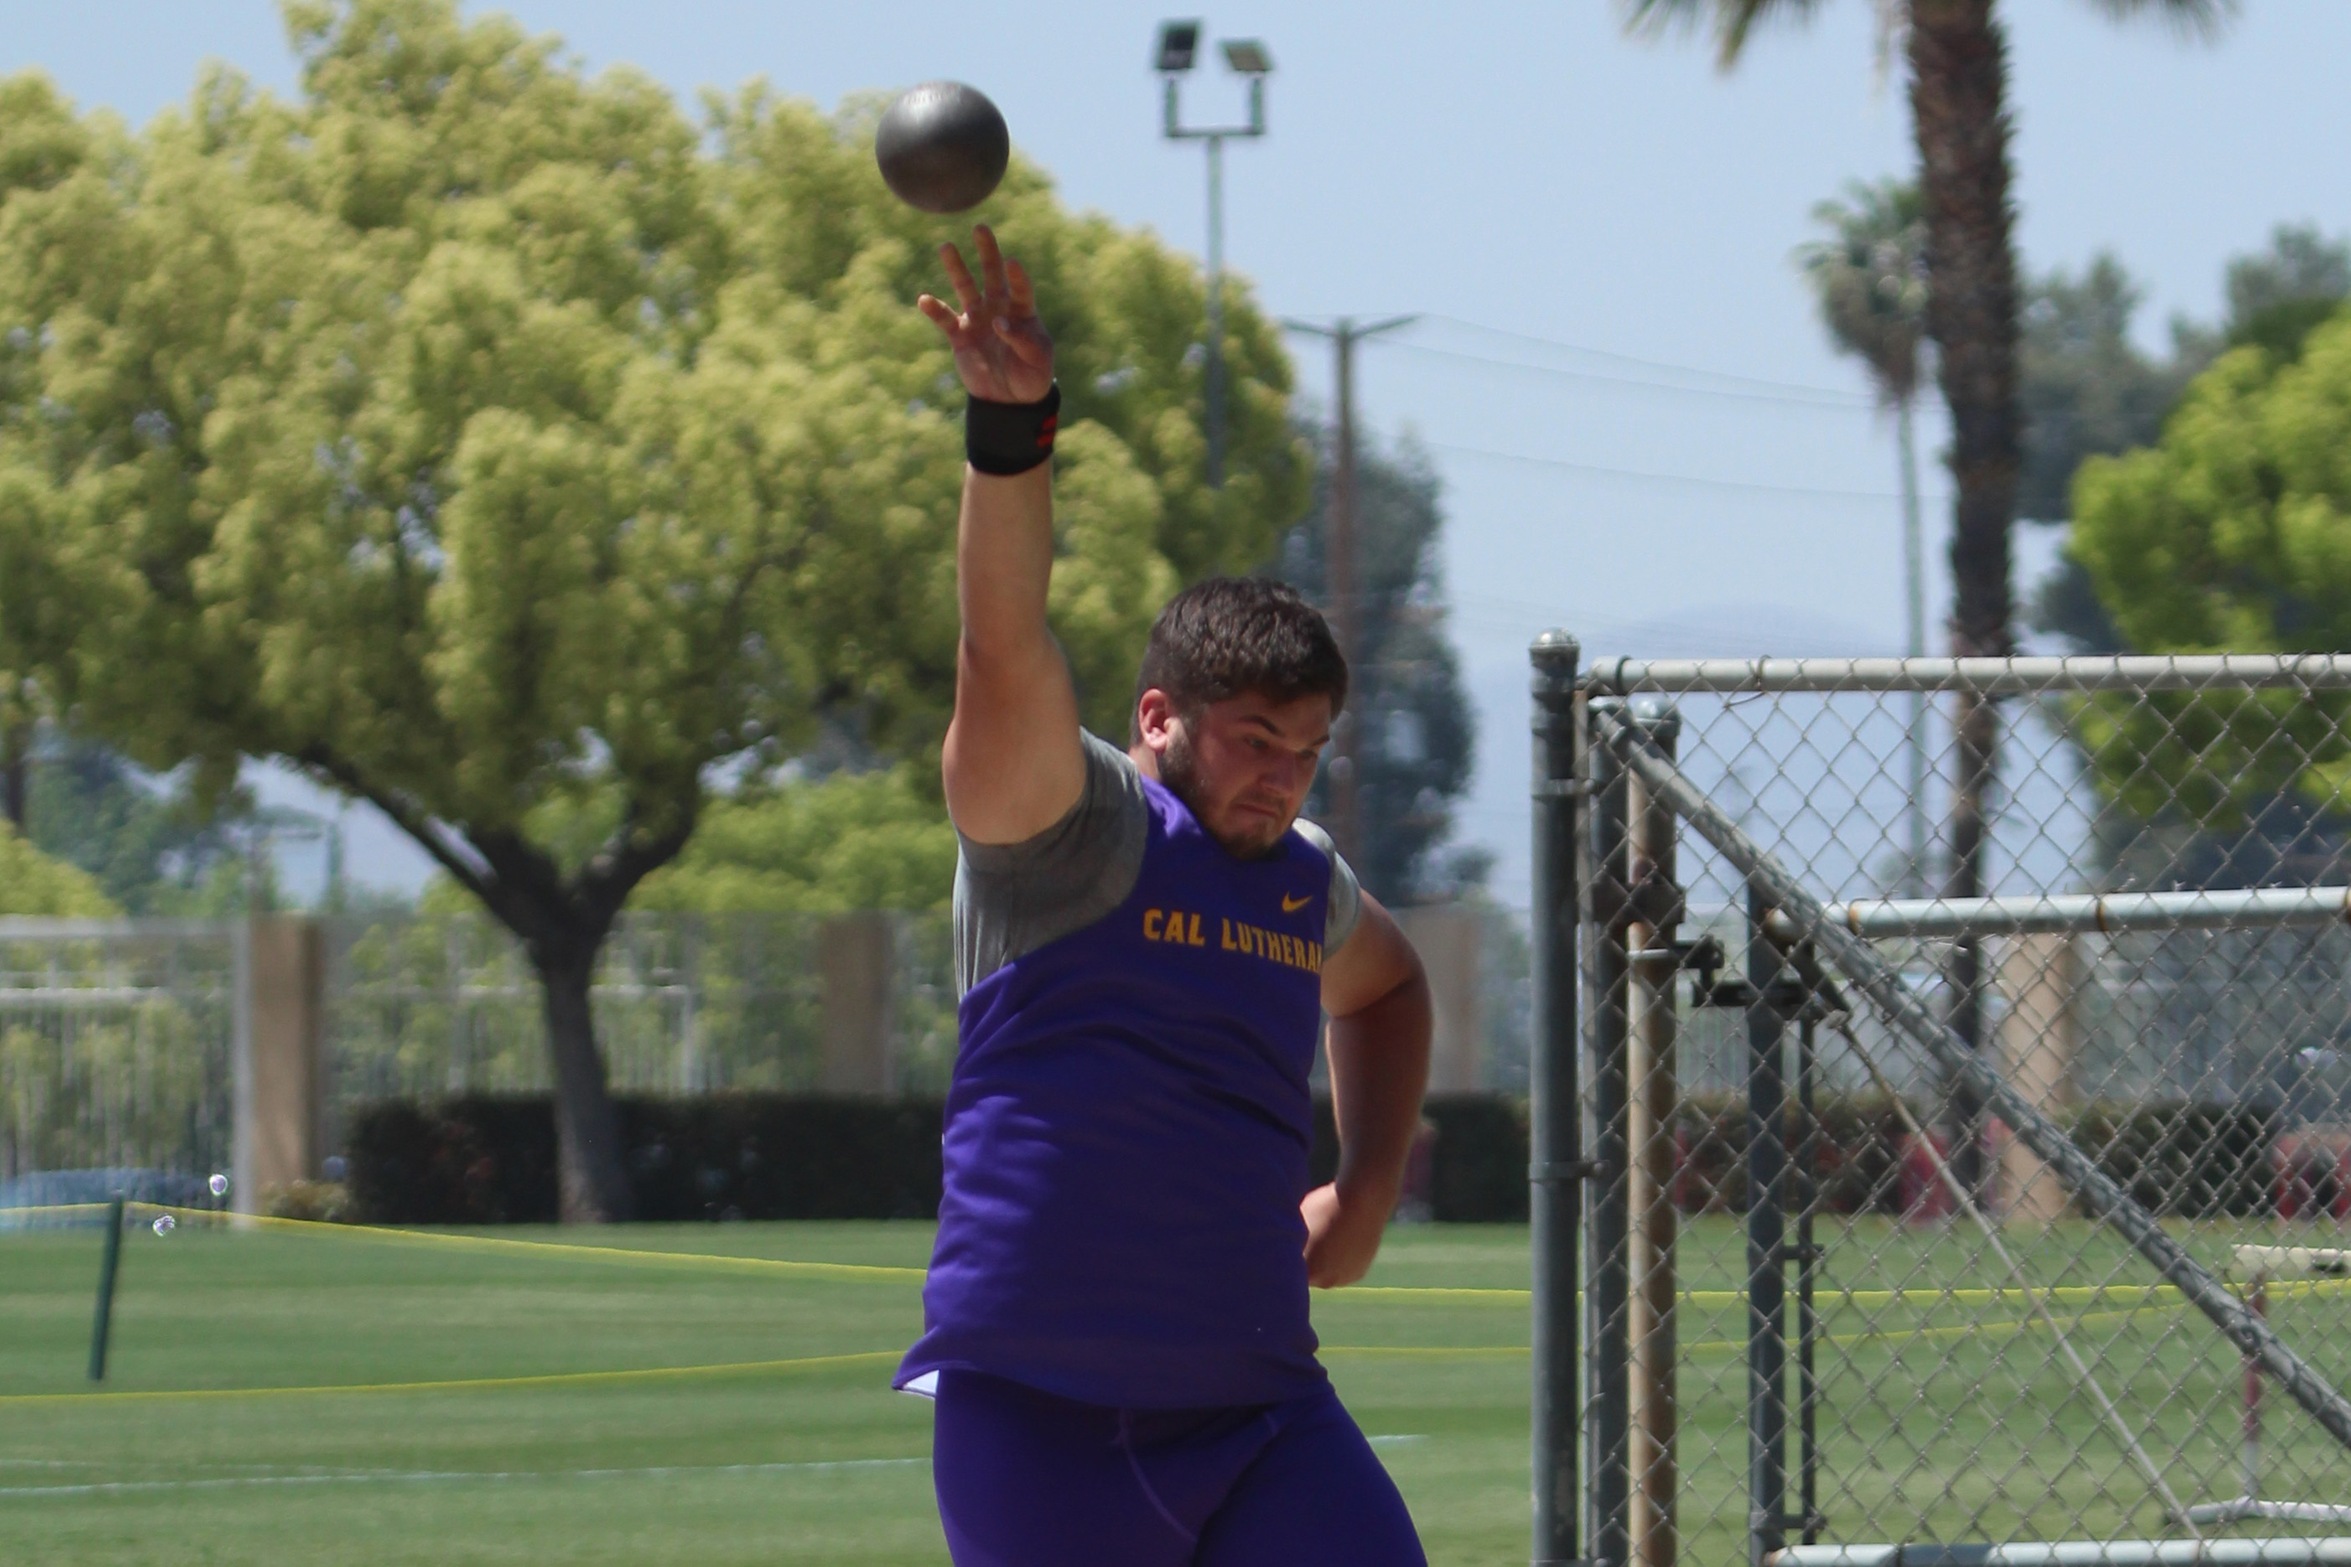 Jake MacKinnon won the discus and hammer, and was third in the shot put, in his first collegiate meet. (Photo: Claire Caldera)